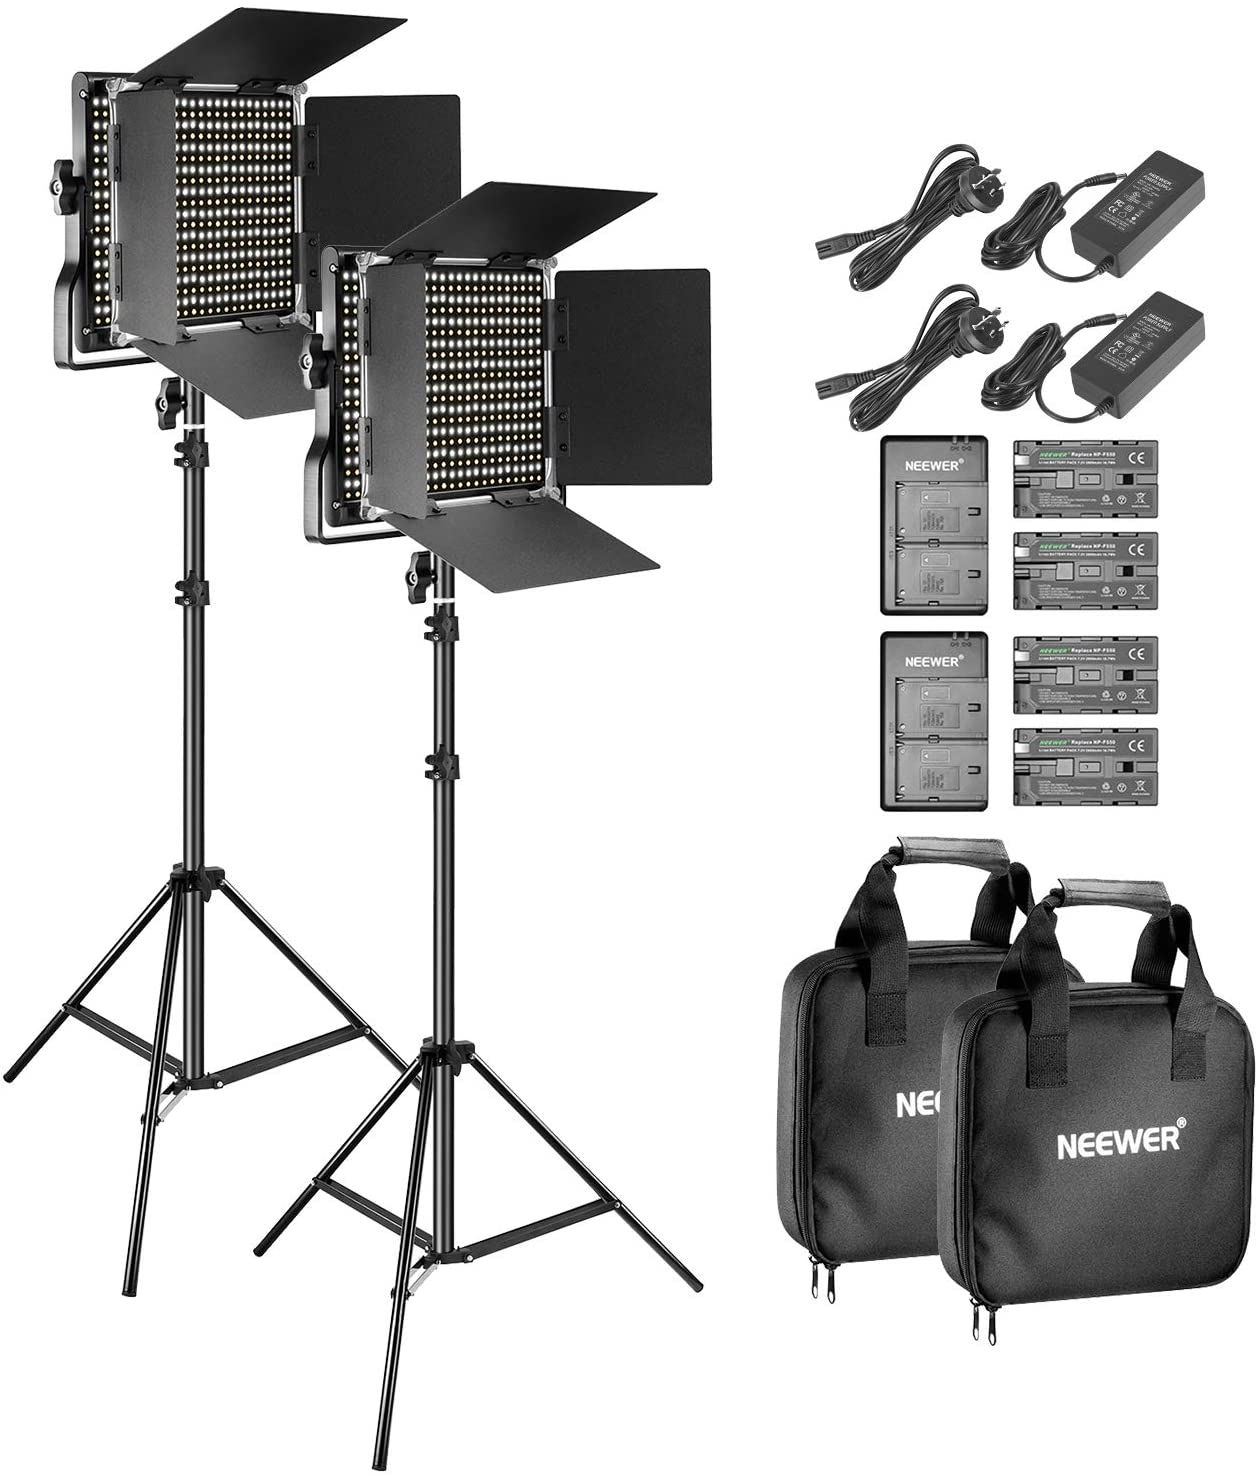 Neewer 2-Pack Bi-Color LED Video Light and Stand Kit with (4)Battery and (4)Charger-660 LED with U Bracket and Barndoor(3200-5600K),3-6.5 Feet Adjustable Light Stand for Studio,YouTube Shooting